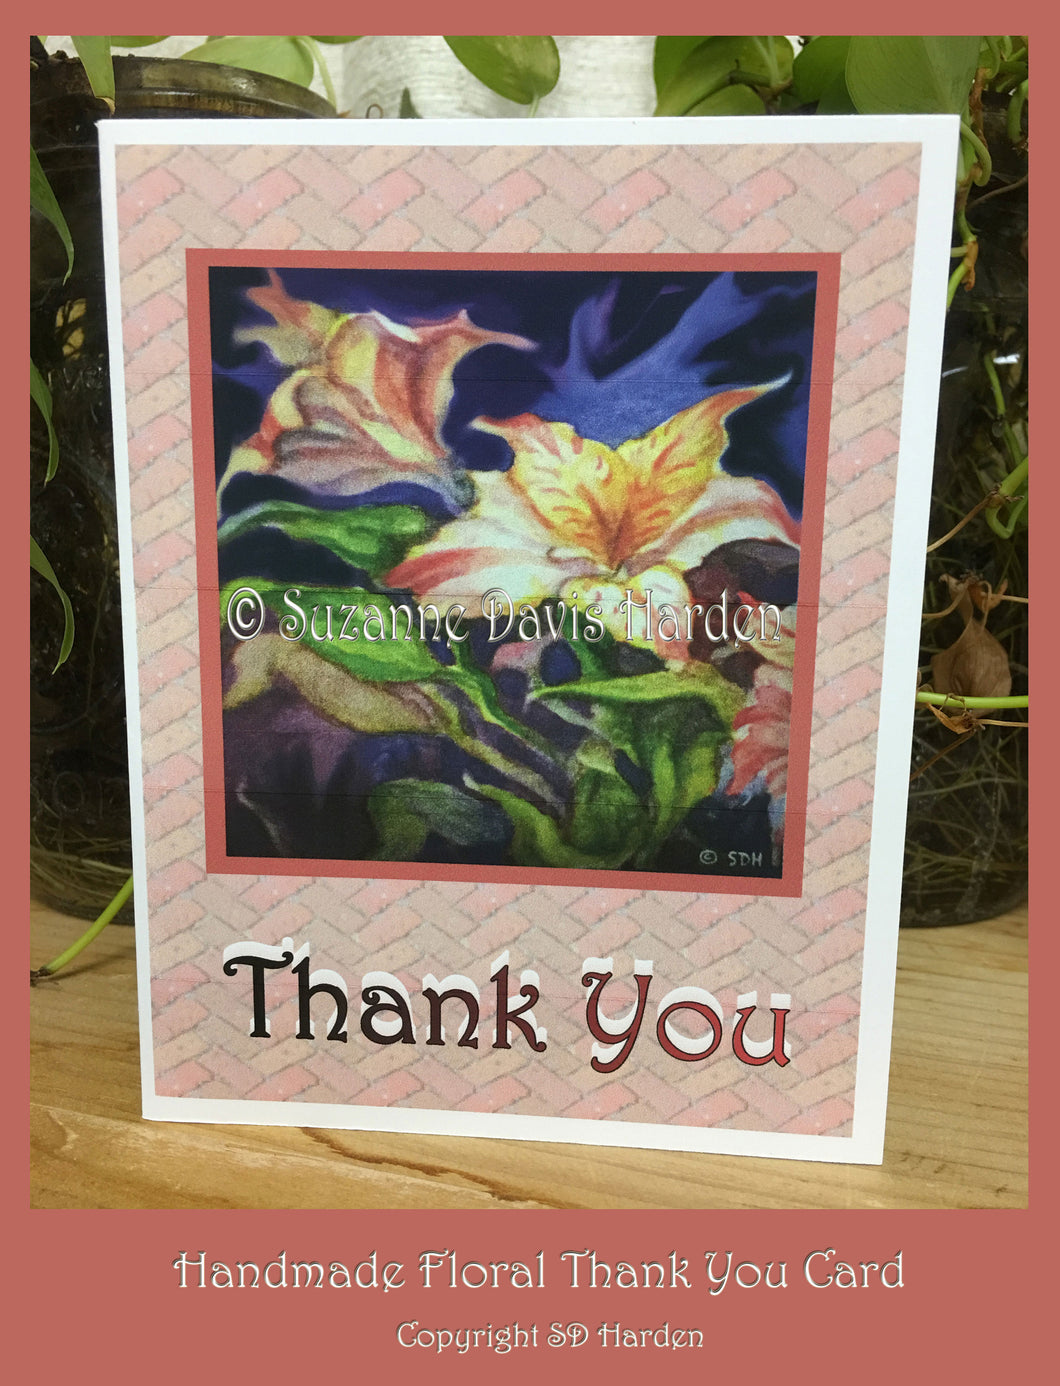 Original Floral Thank You Card with Matching Envelope by Suzanne Davis Harden